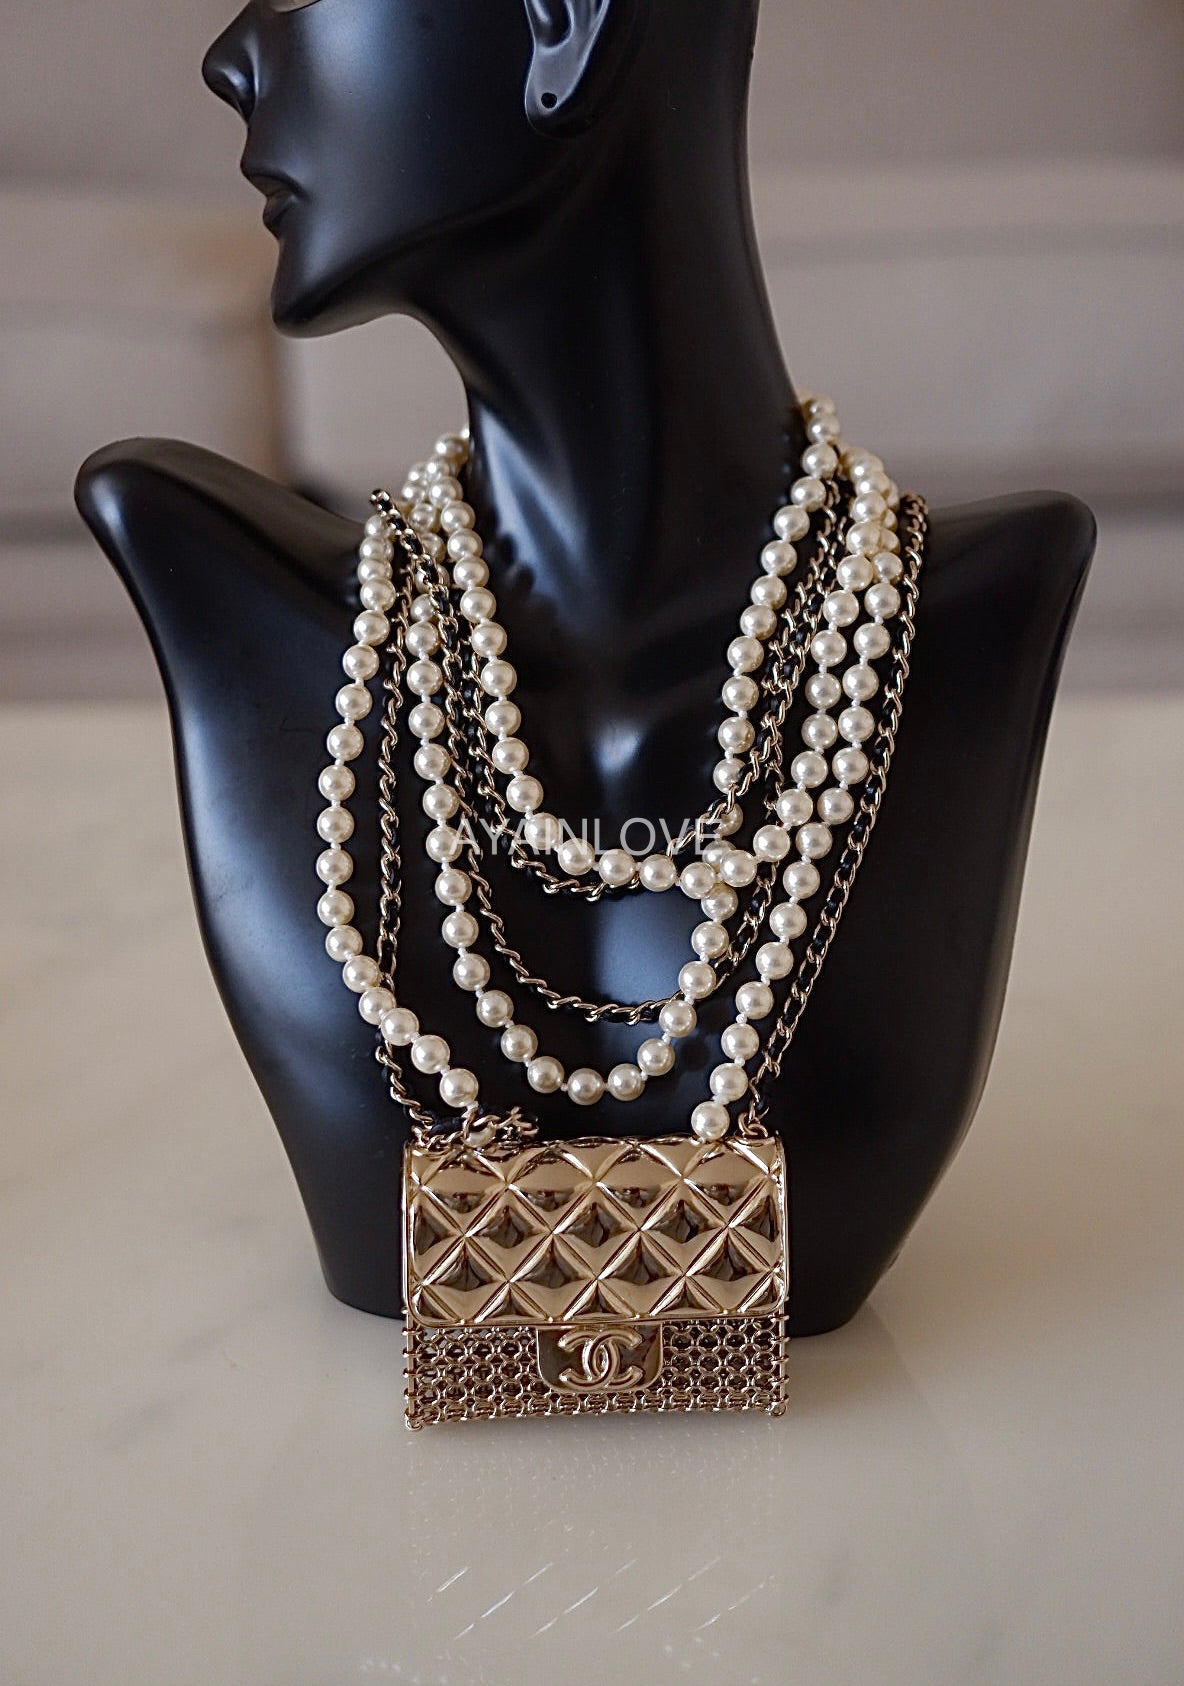 Chanel Timeless Black Quilted Classic Pearl Chain Flap Bag Gold